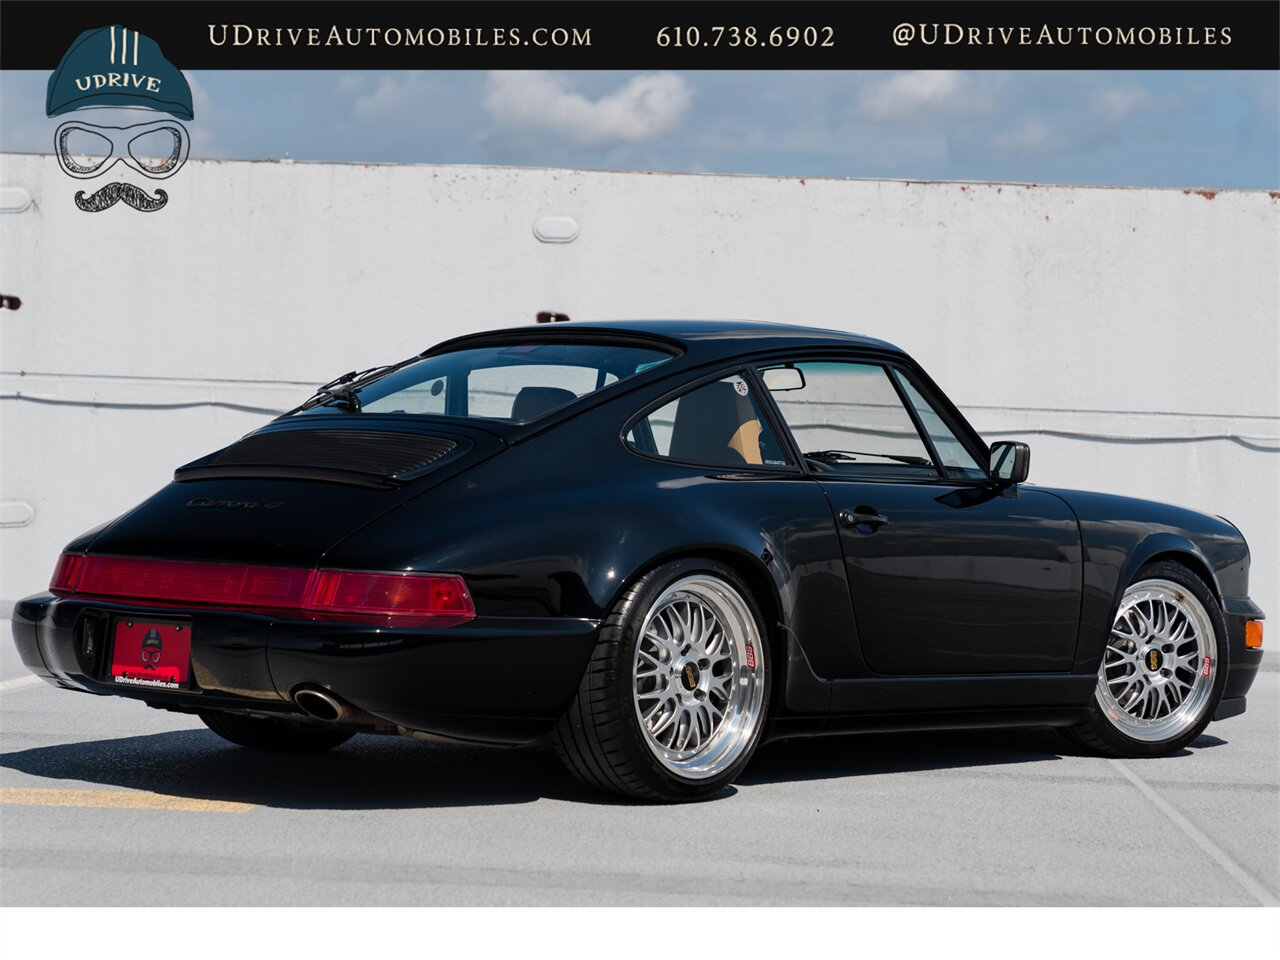 1989 Porsche 911 Carrera 4  964 C4 5 Speed Manual $63k Recent Service and Upgrades - Photo 2 - West Chester, PA 19382